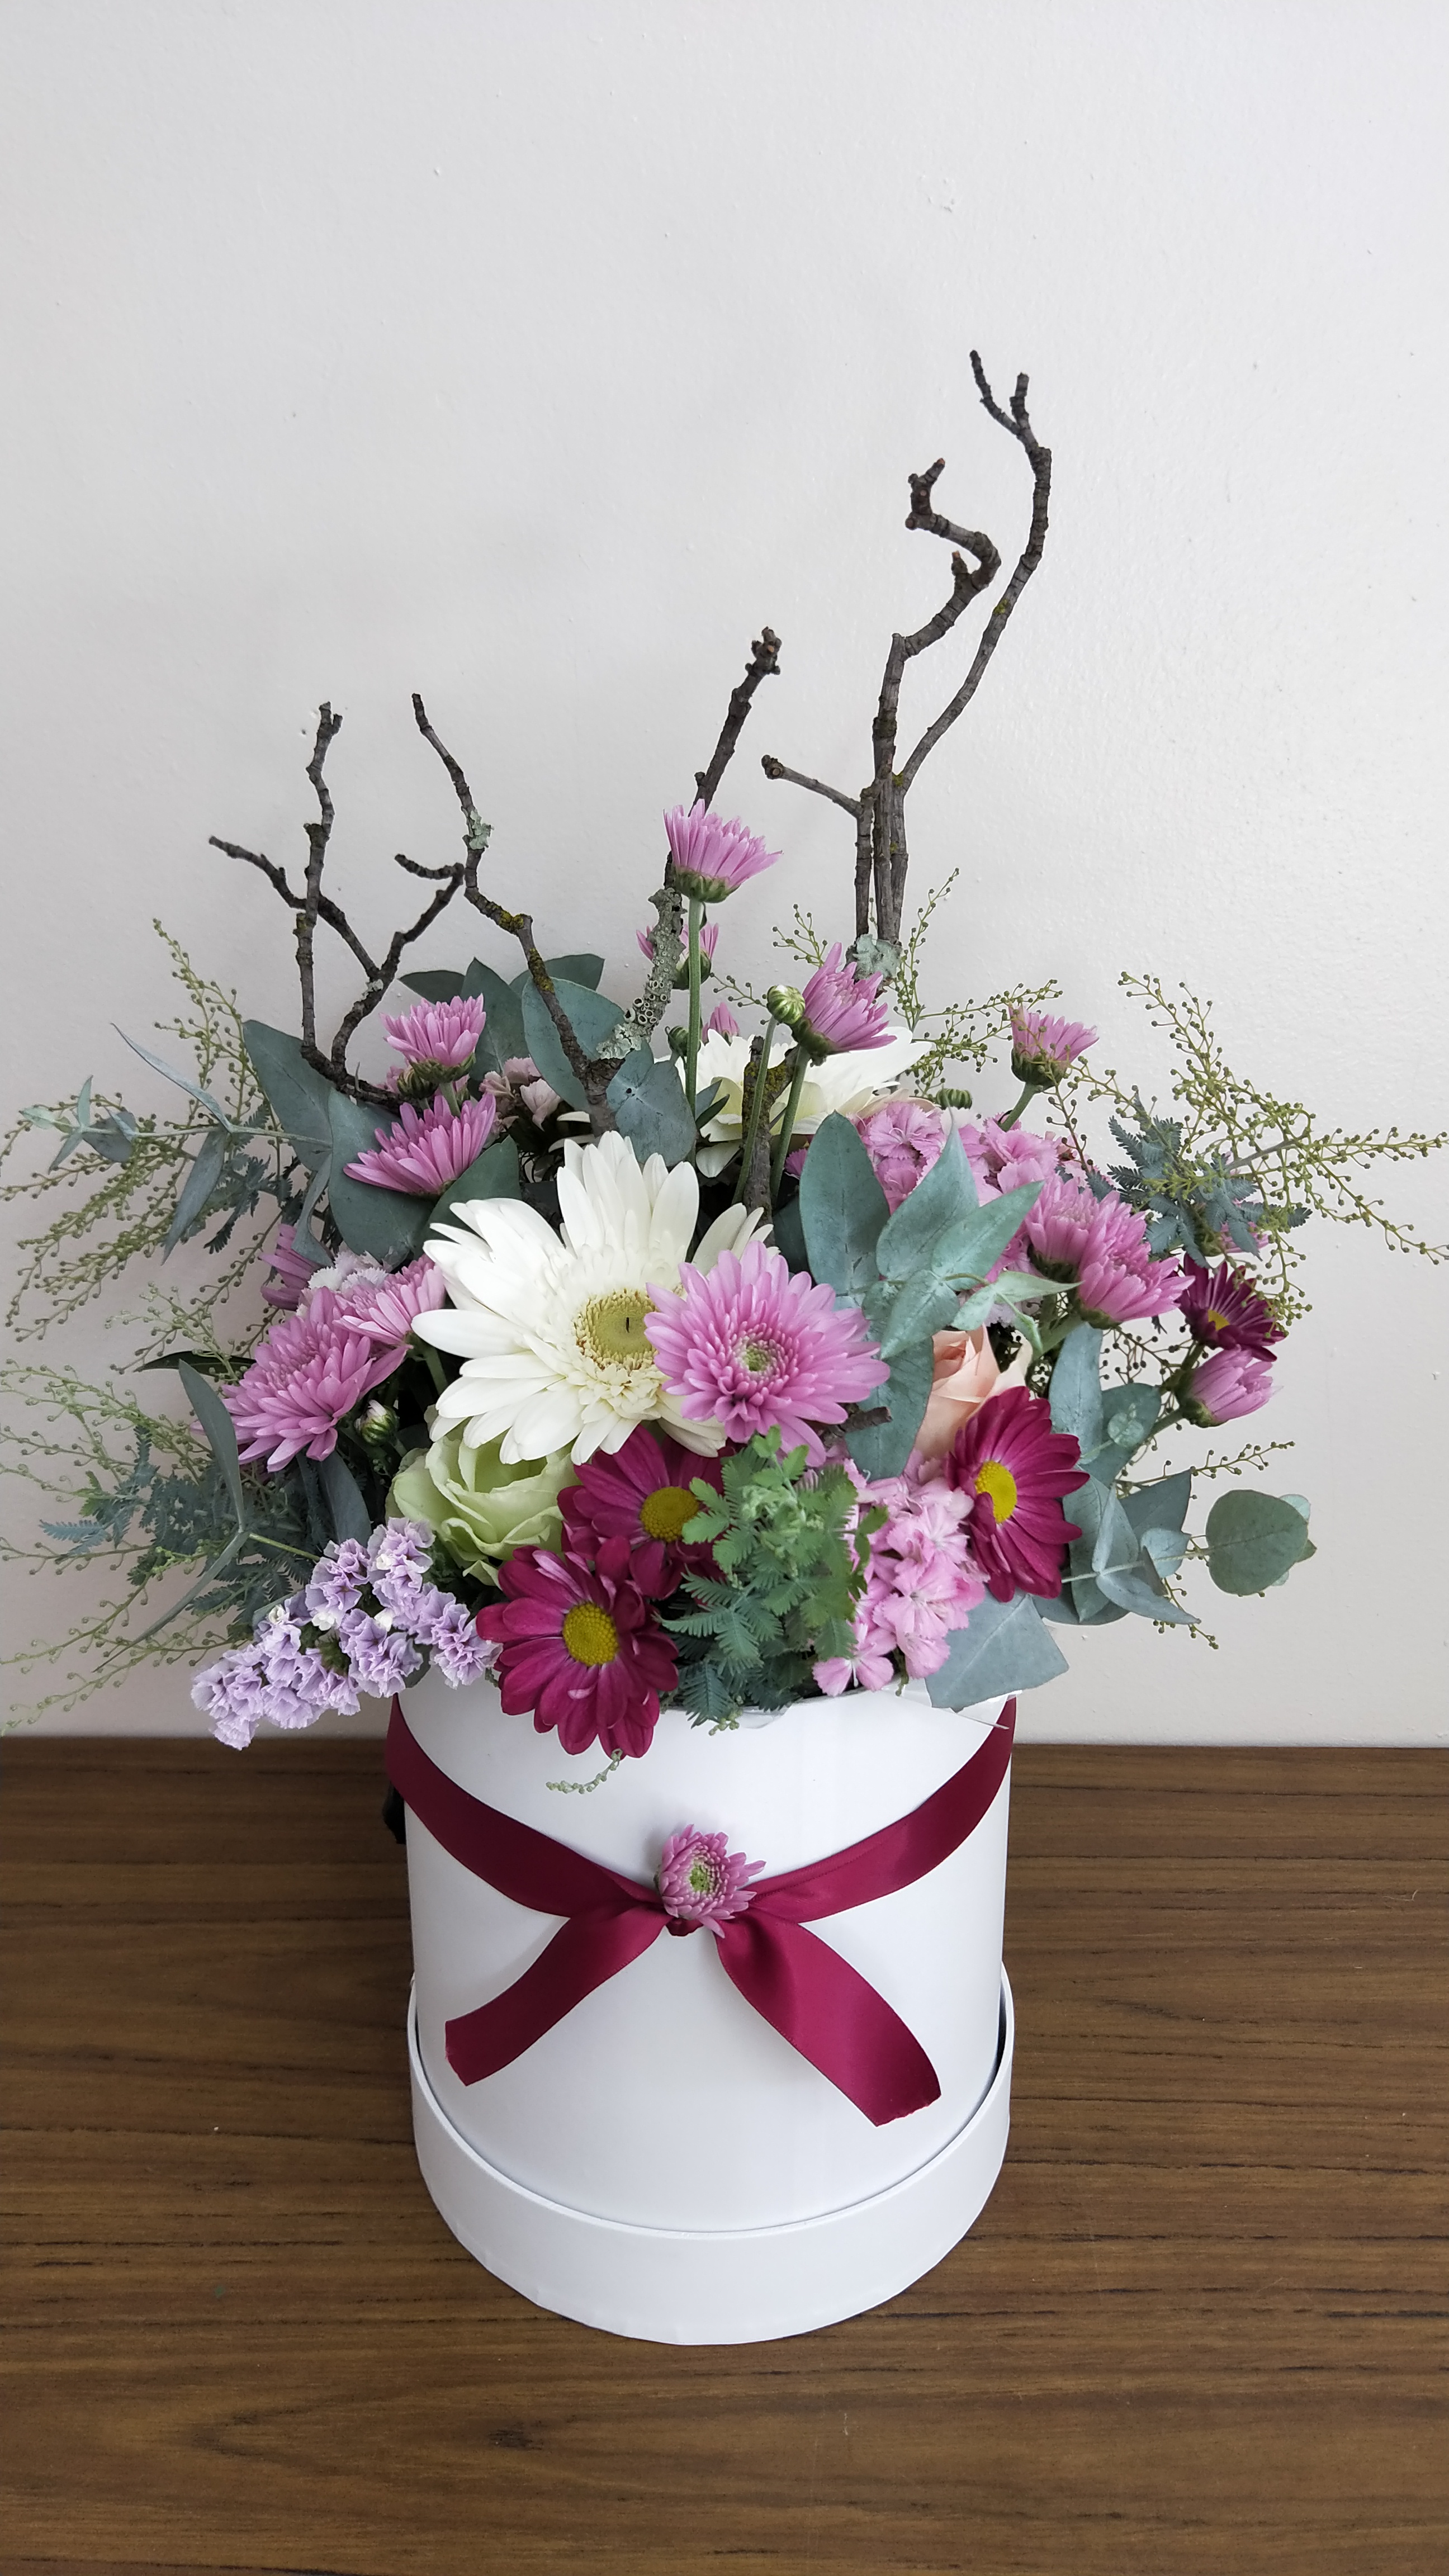 Unique Hatbox arrangement makes an ideal gift to spoil your loved ones.